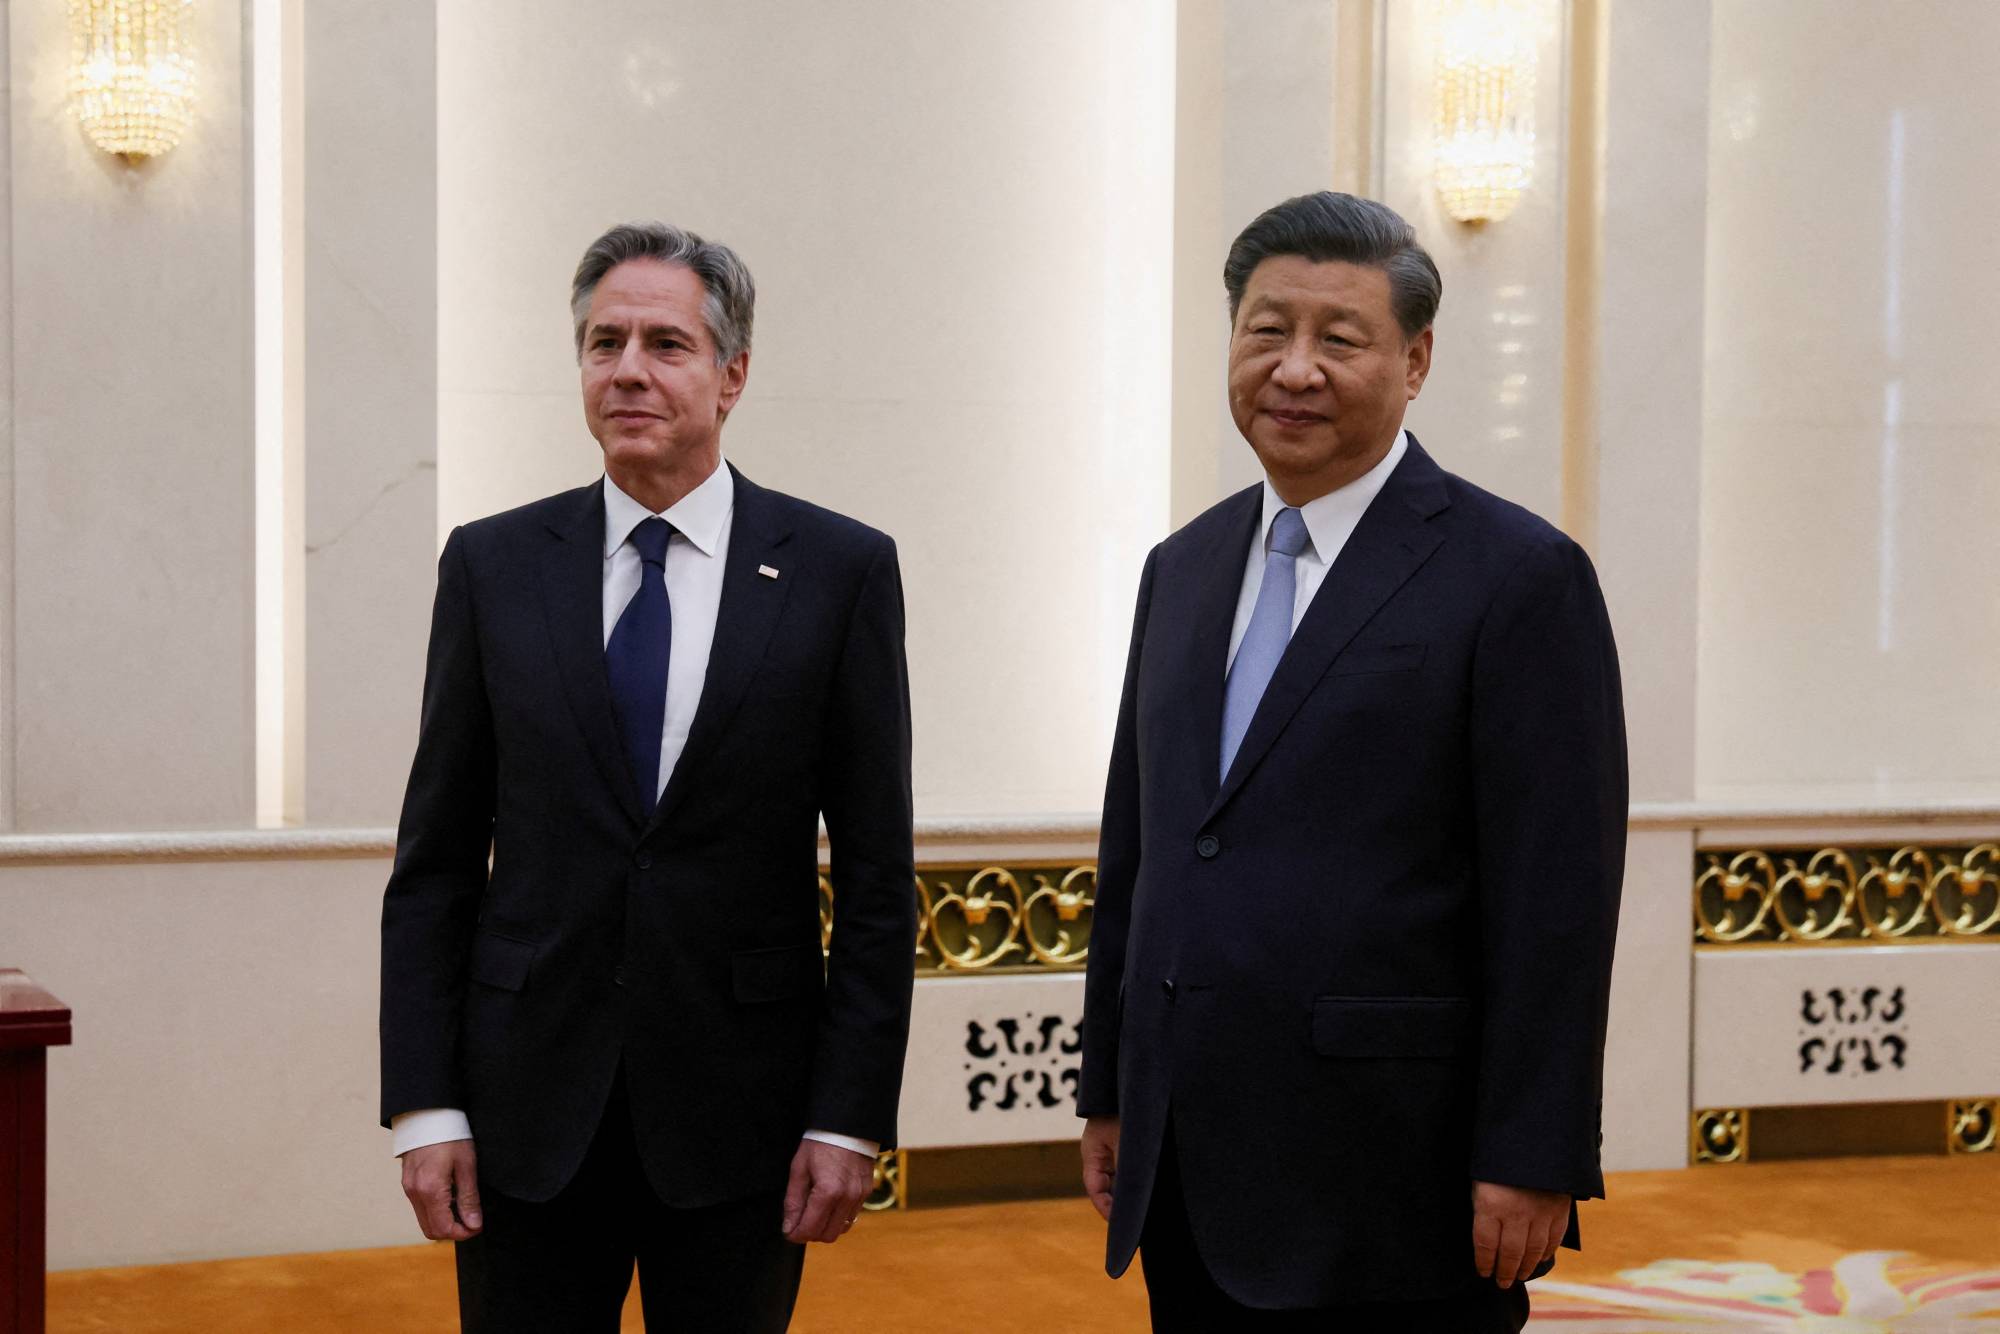 U.S. Secretary of State Antony Blinken meets with Chinese President Xi Jinping in the Great Hall of the People in Beijing on Monday.  | POOL / VIA REUTERS